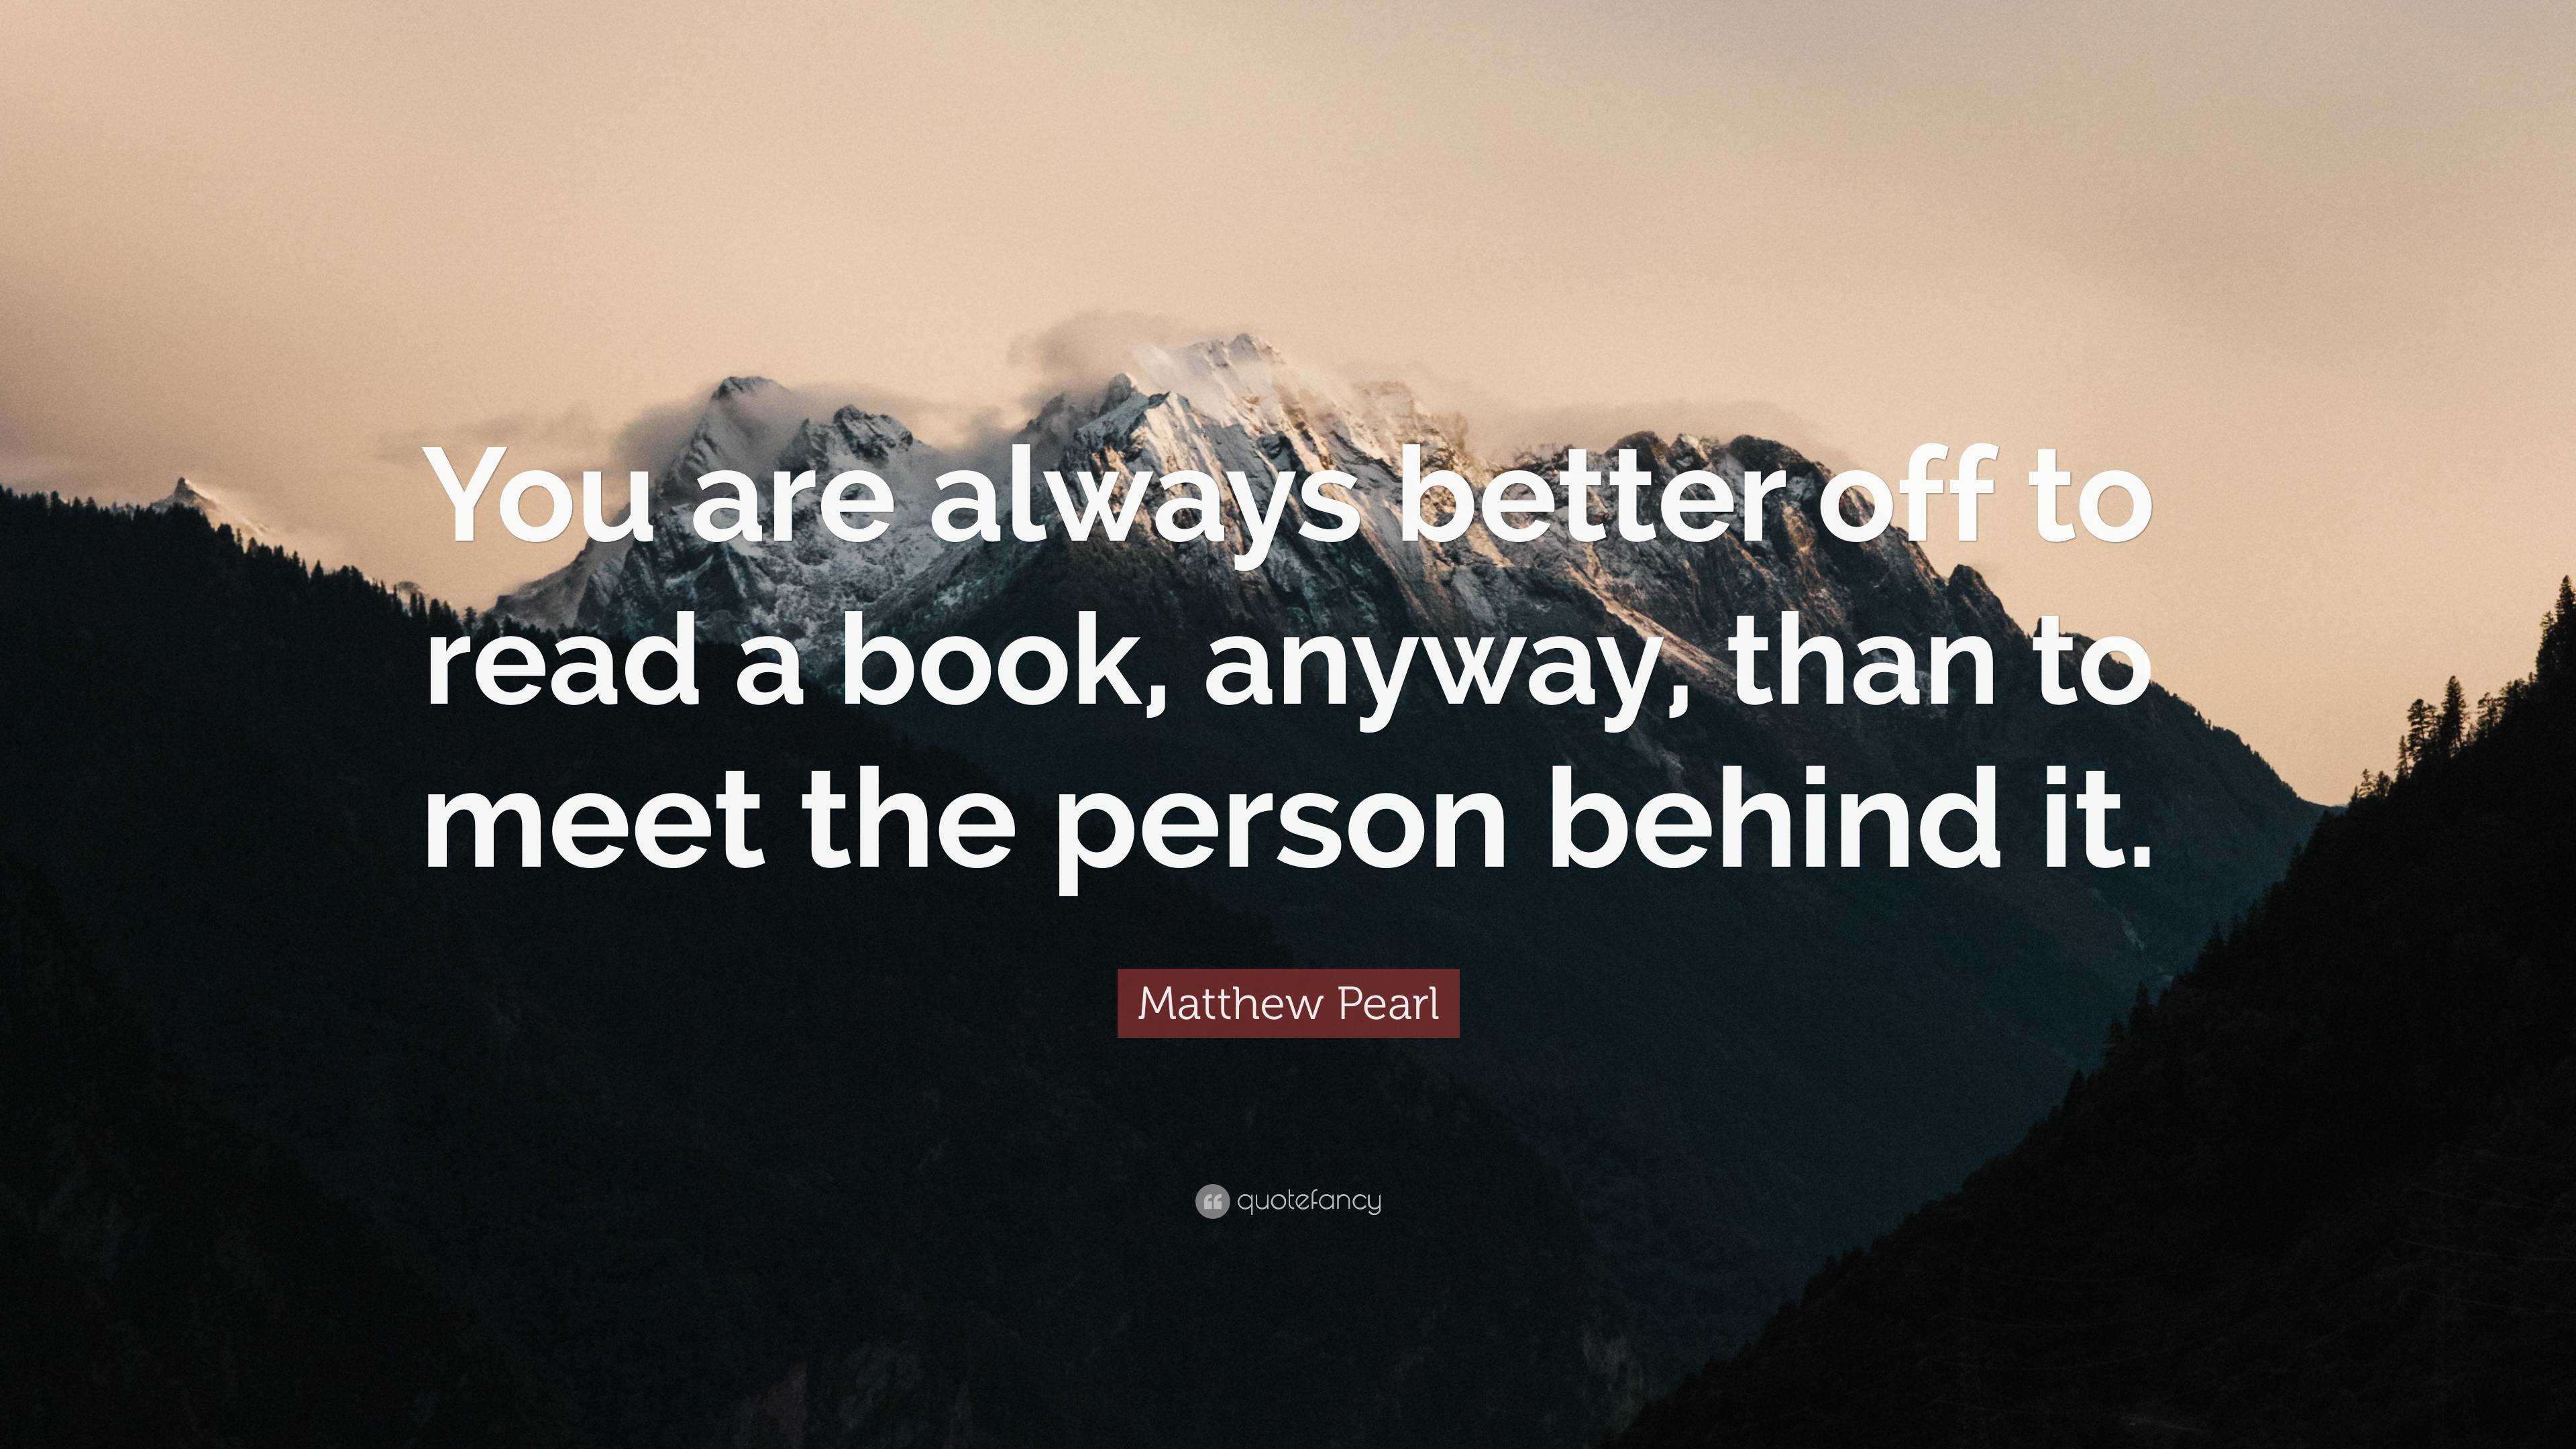 Matthew Pearl Quote: “You are always better off to read a book, anyway ...